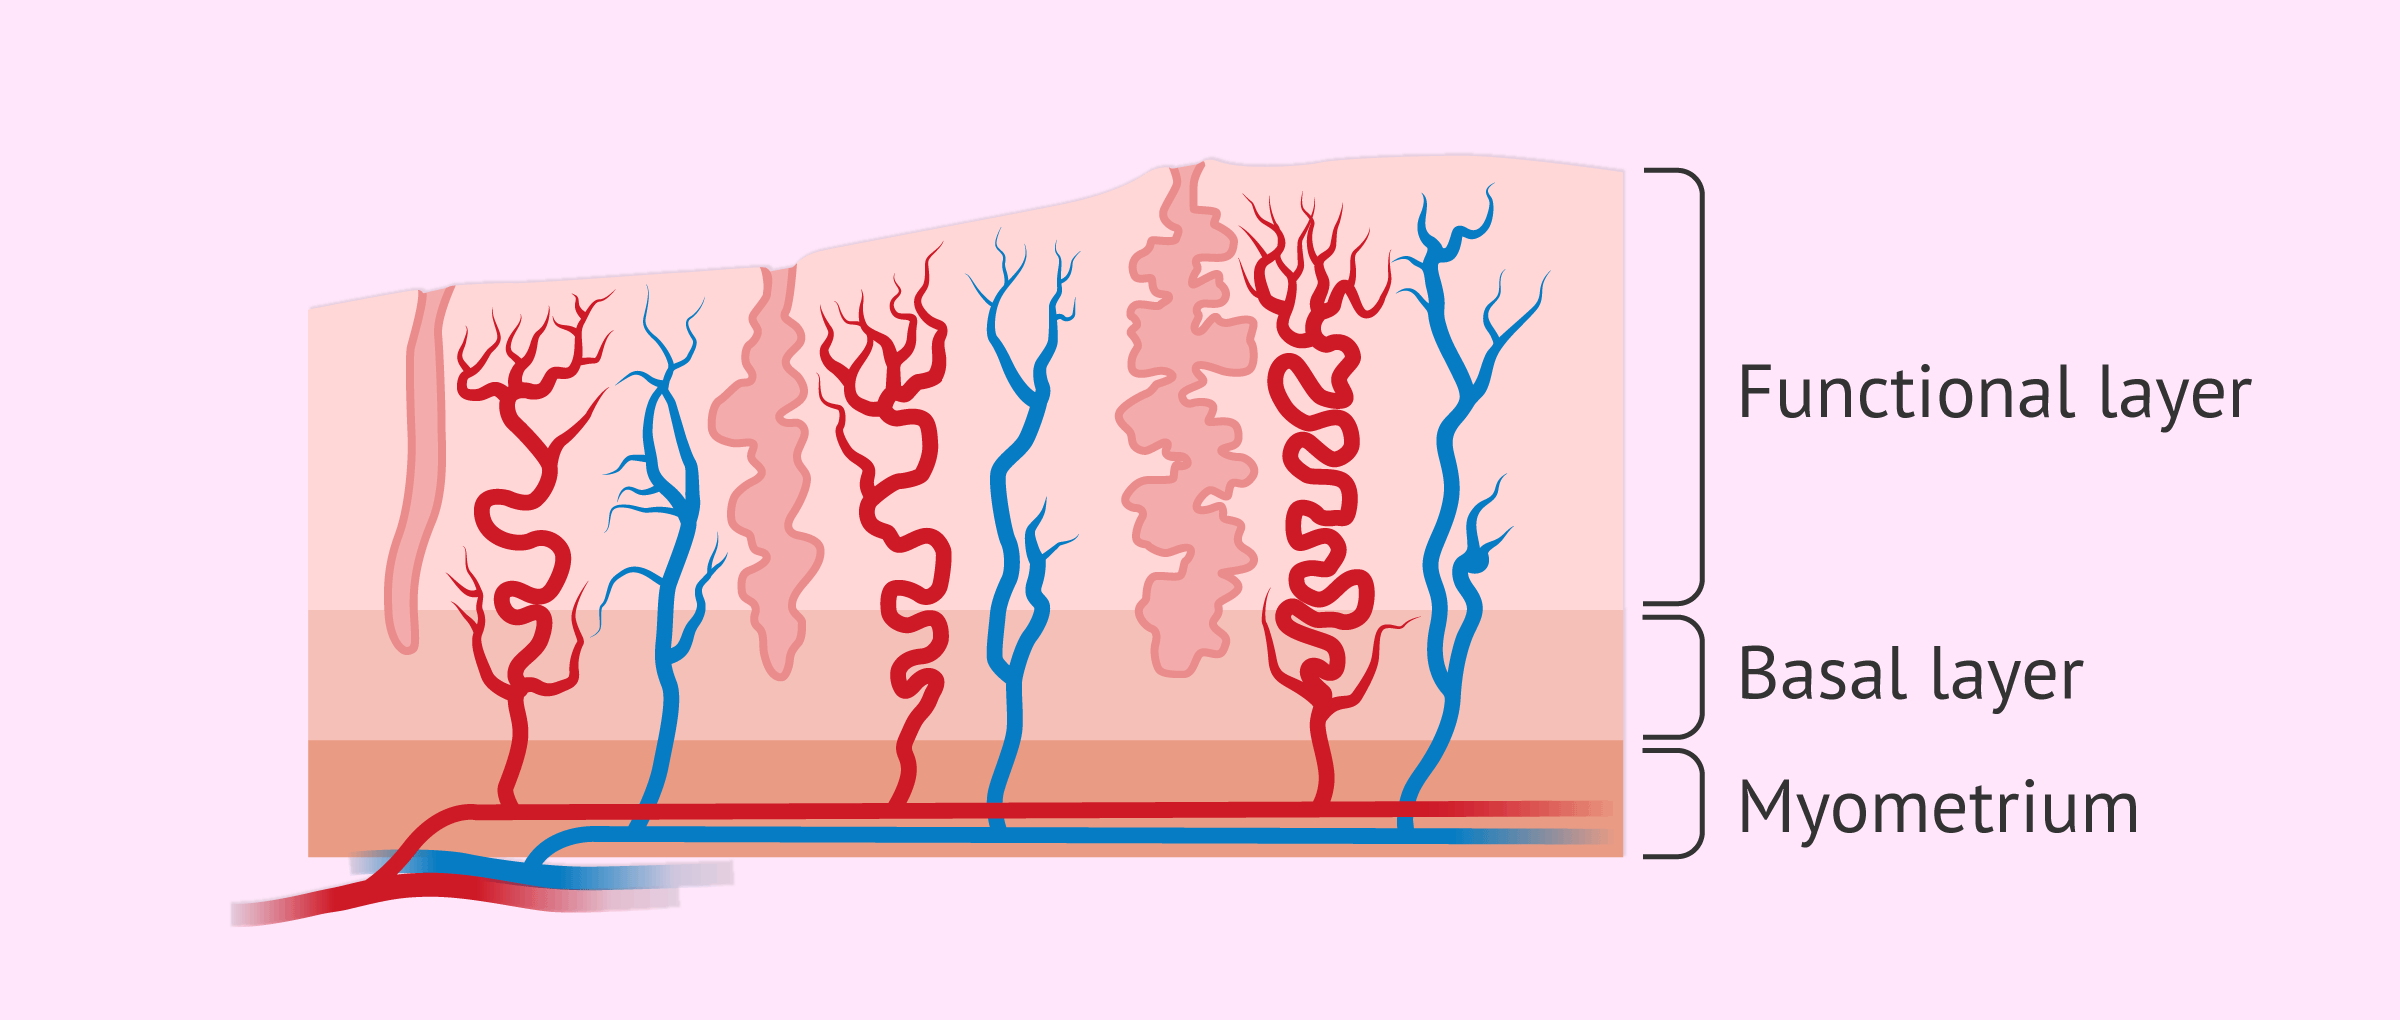 What layers does the endometrium contain?